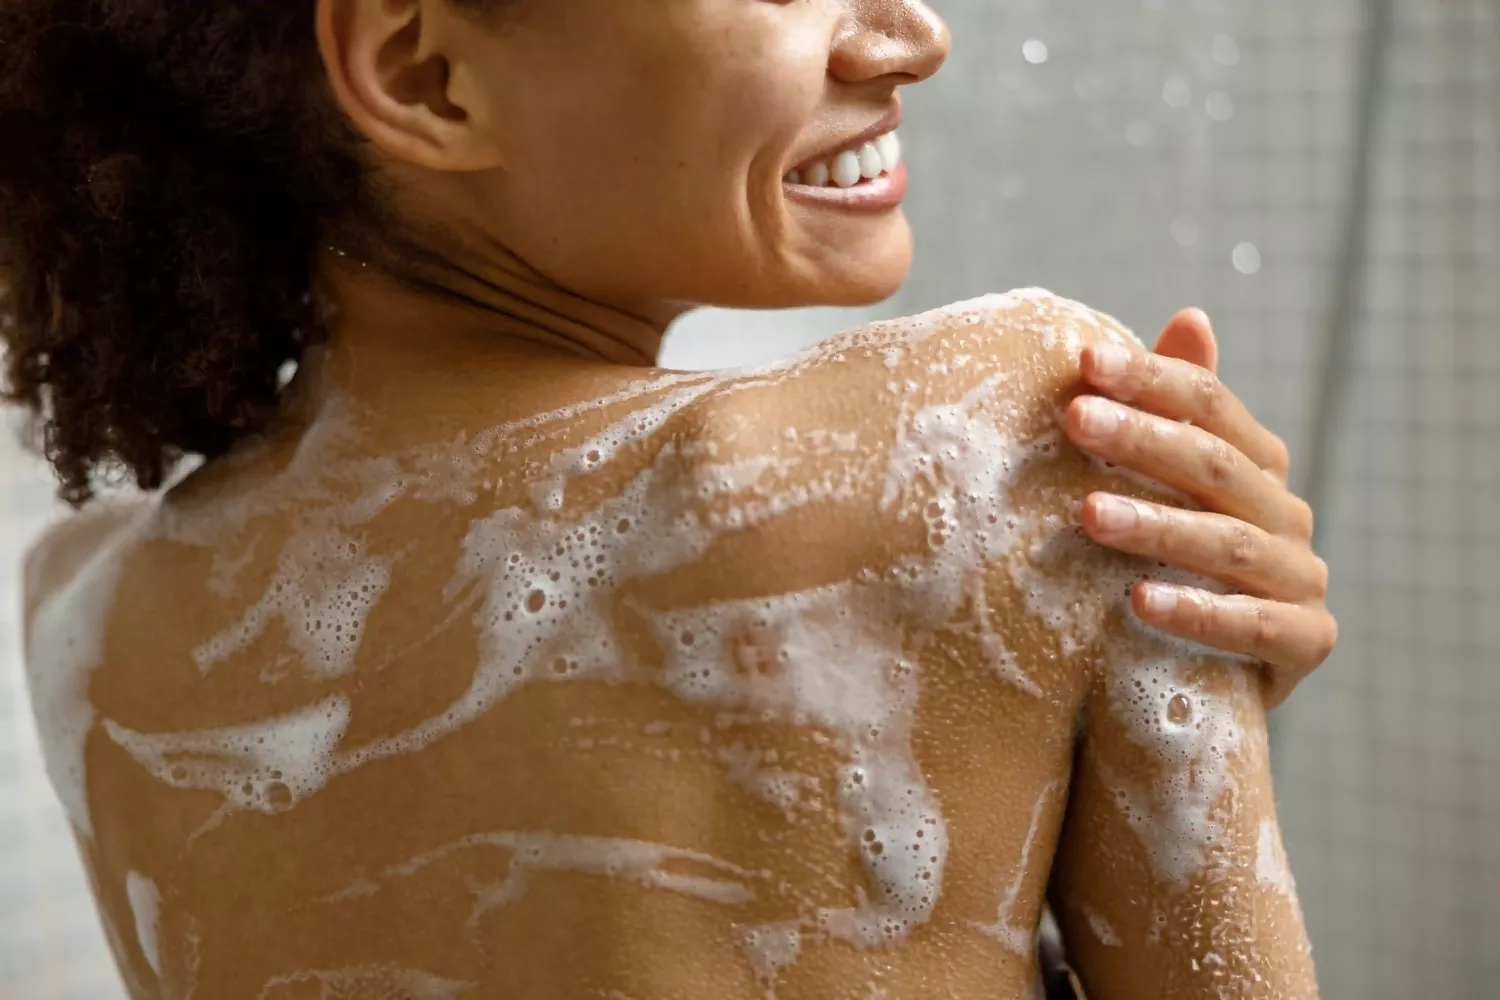 Woman With Suds On Her Back In The Shower R